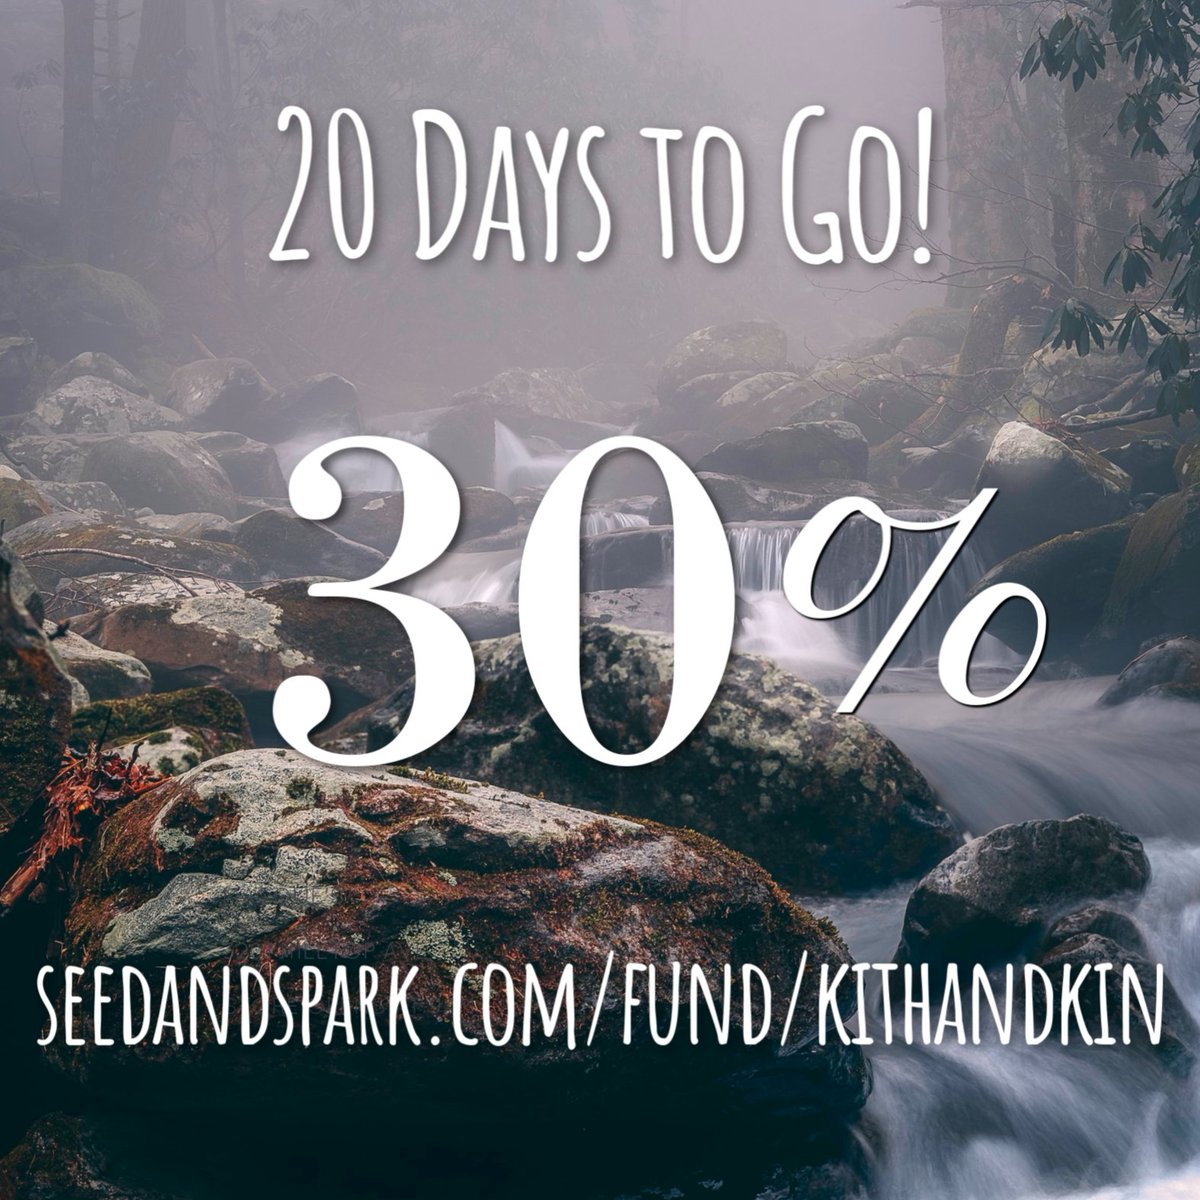 At 30% funded, we are thrilled with your support!! Only 20 days left to reach our goals. Visit seedandspark.com/fund/kithandkin to pledge, share or simple follow the campaign to learn more info about the series!